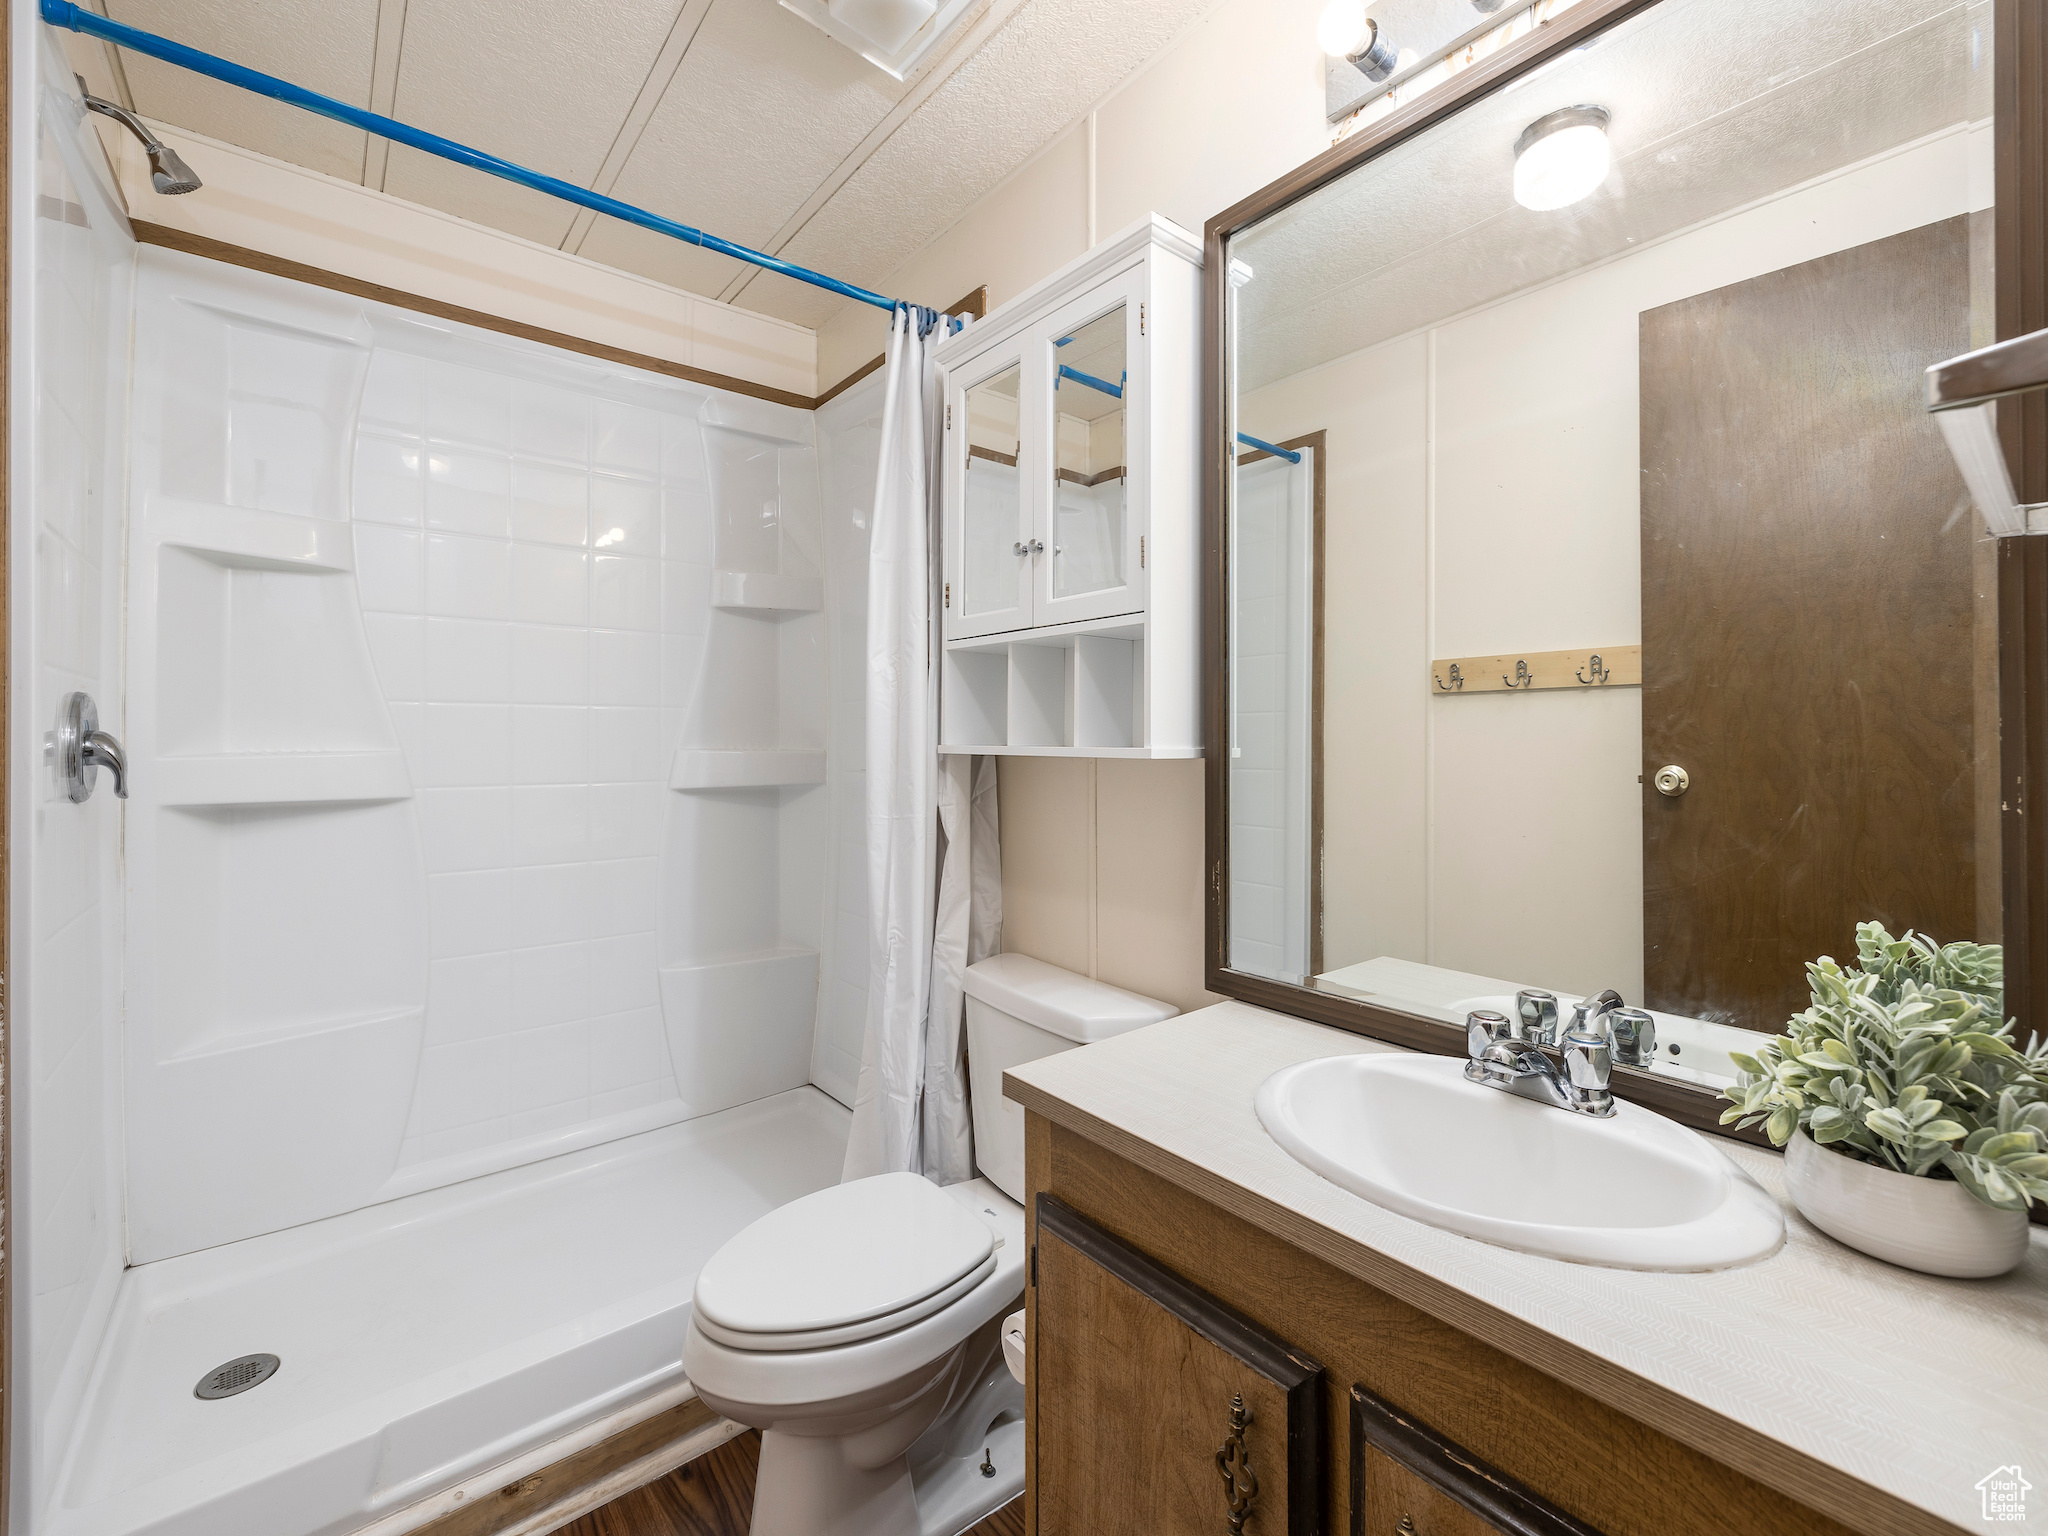 Bathroom with a shower with curtain, vanity with extensive cabinet space, and toilet